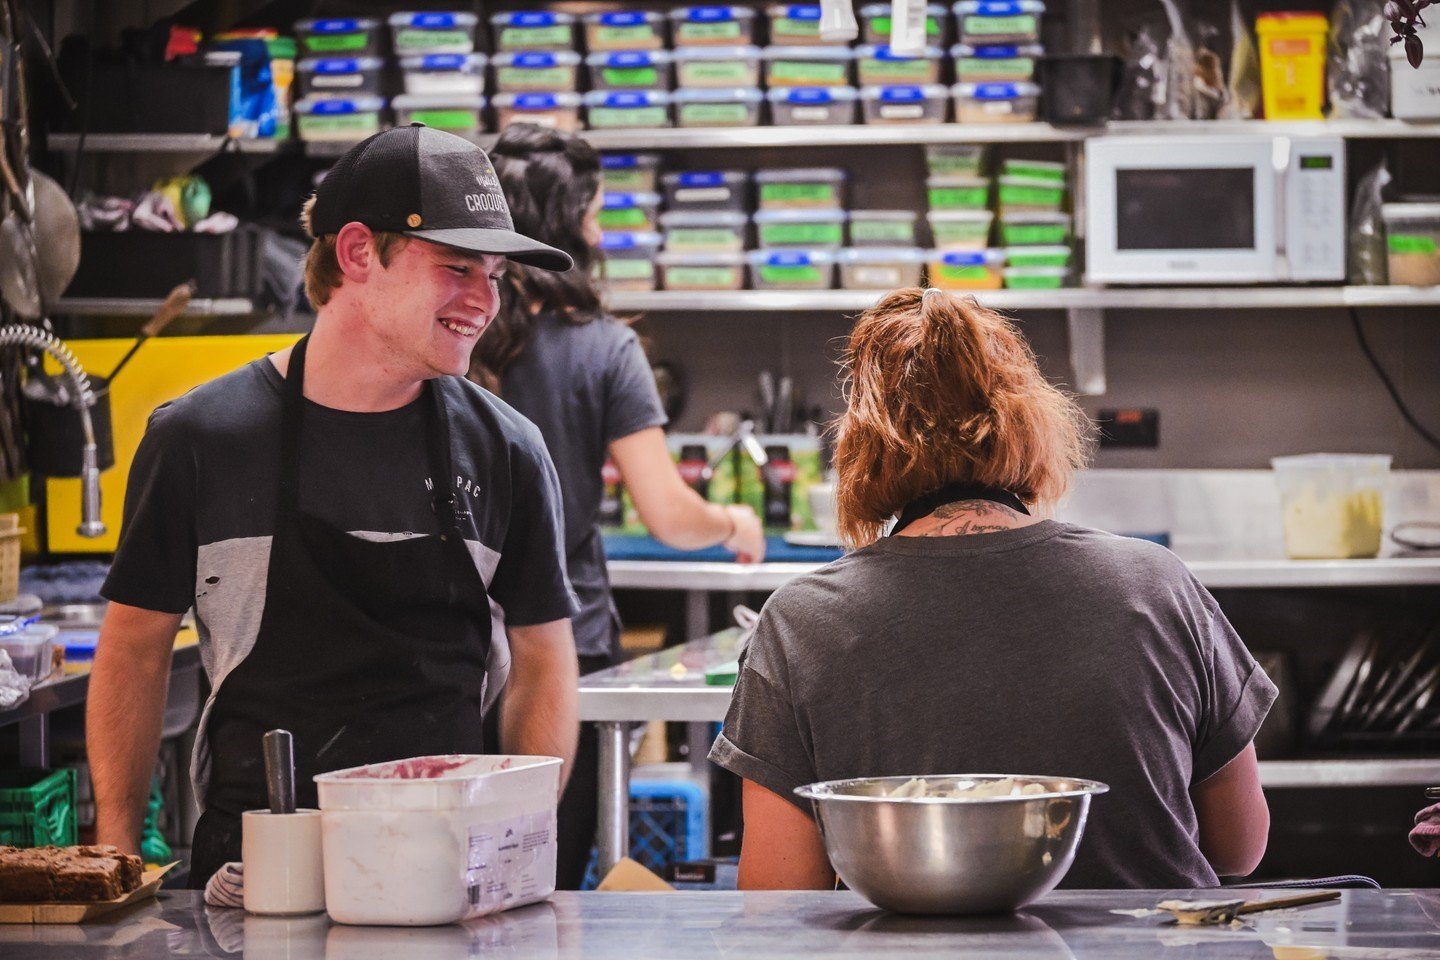 The secret to a happy vintage team...happy bellies! 😜
Huge thanks to the kitchen teams around the motu for your awesome mahi keeping our crews well fed with your delicious food! 

📷 Nicolas Tous

#nzwine #winenewzealand #newzealandwines #nzwinery #